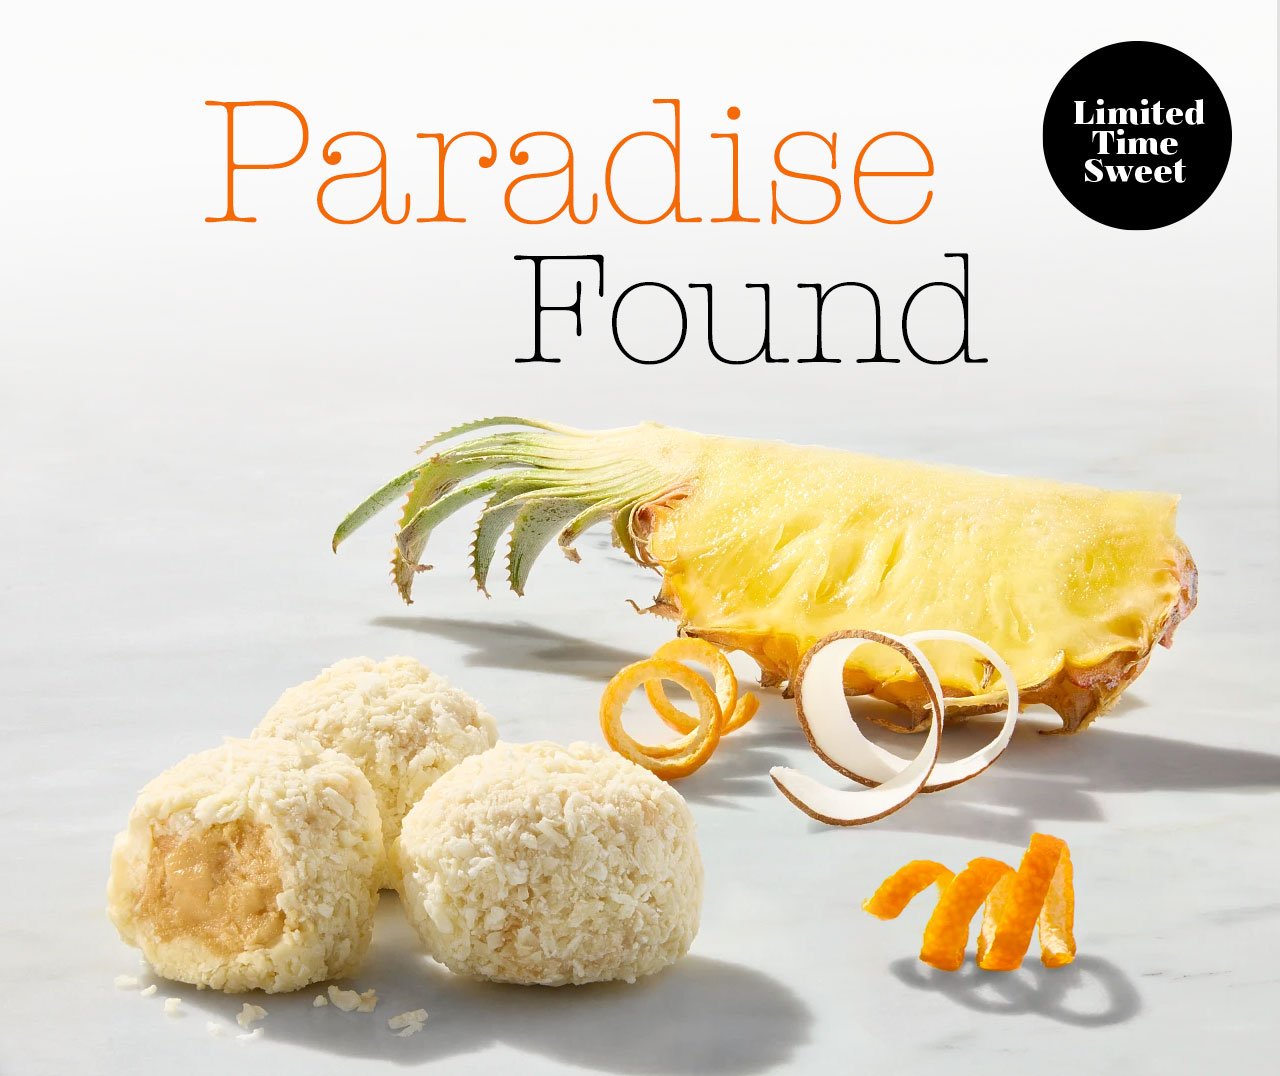 Limited Time Sweet Paradise Found